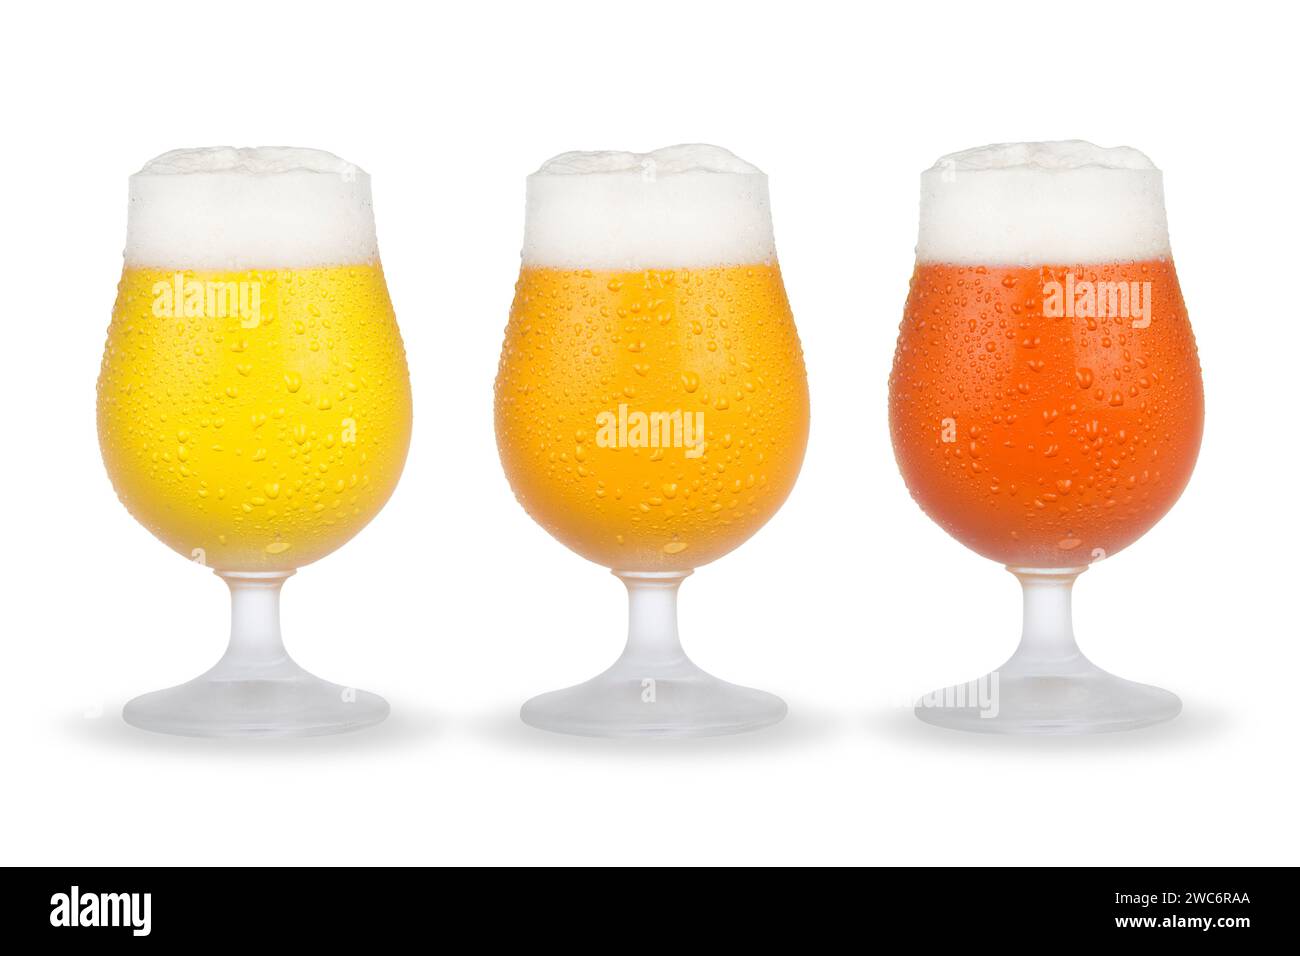 Beer glasses with different styles of beer isolated on white background. Stock Photo